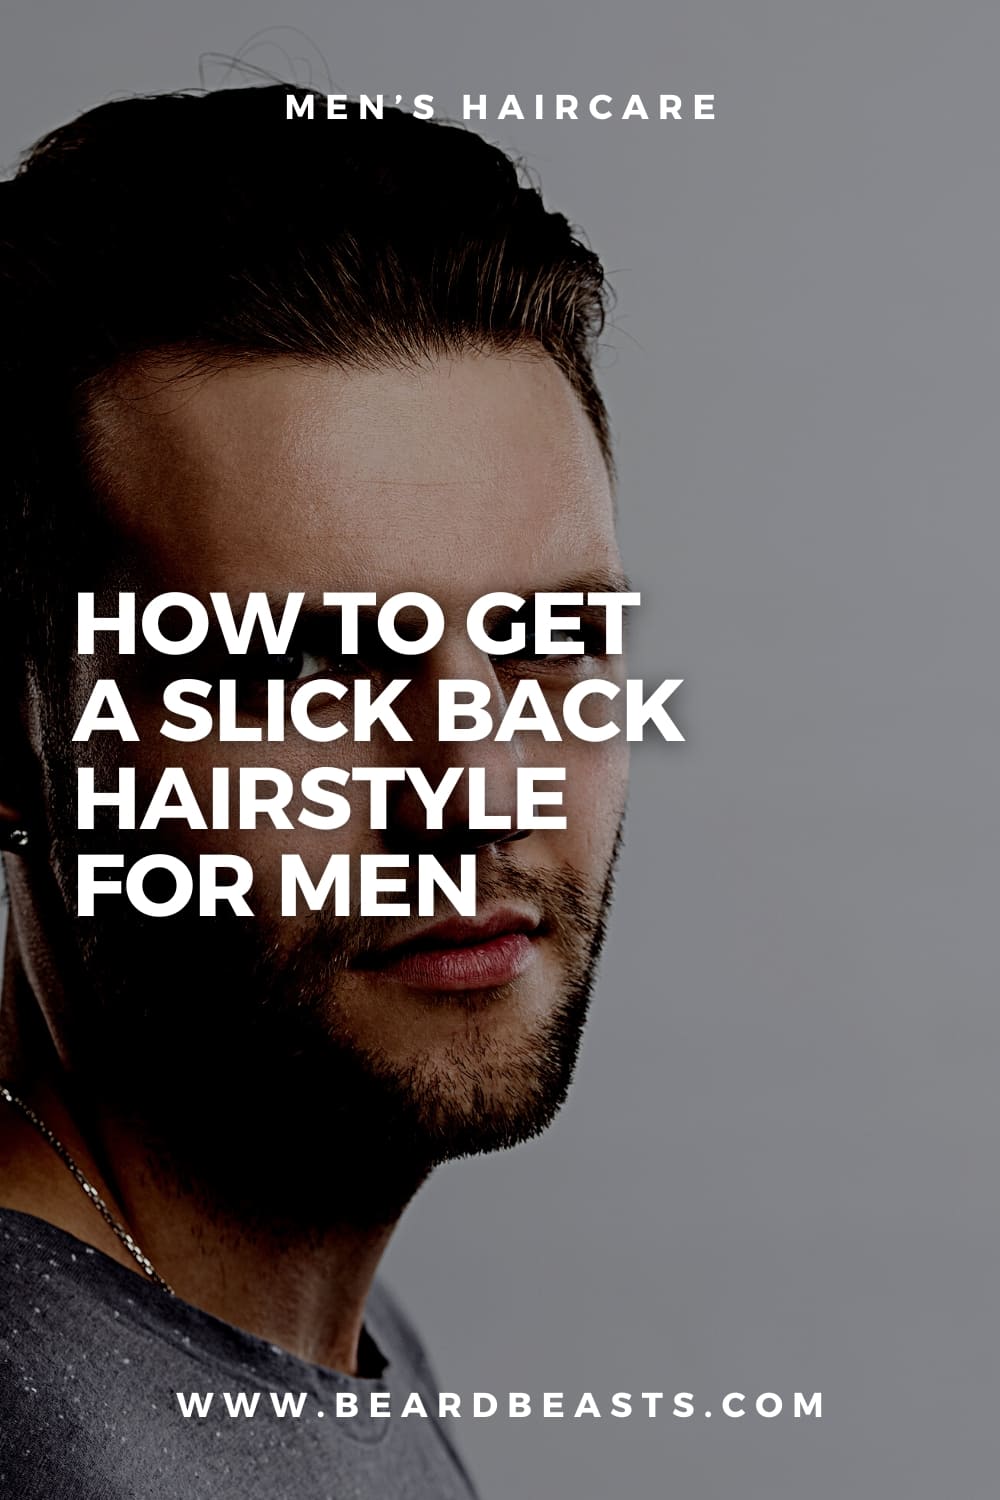 Promotional image for an article on men's haircare featuring a close-up side view of a man with a slick back hairstyle. Large text reads 'How to get a slick back hairstyle for men.' The website 'www.beardbeasts.com' is listed at the bottom.